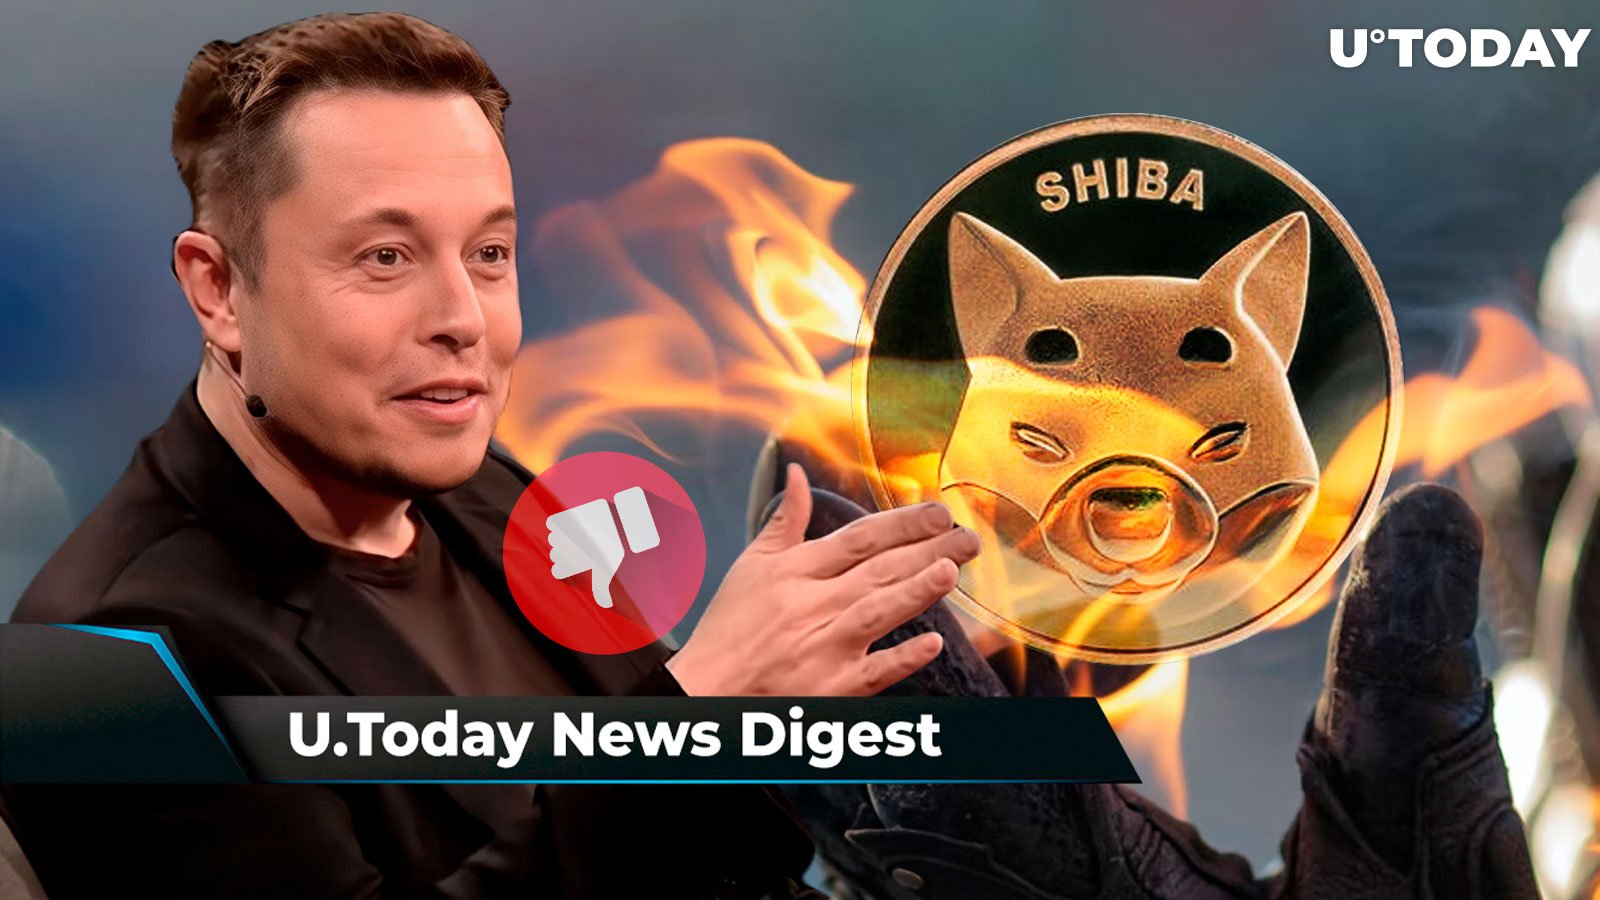 SHIB Burn Rate Raises Concerns, DOGE Creator No Longer Likes Elon Musk, SHIB and DOGE Accepted by Hublot: Crypto News Digest by U.Today